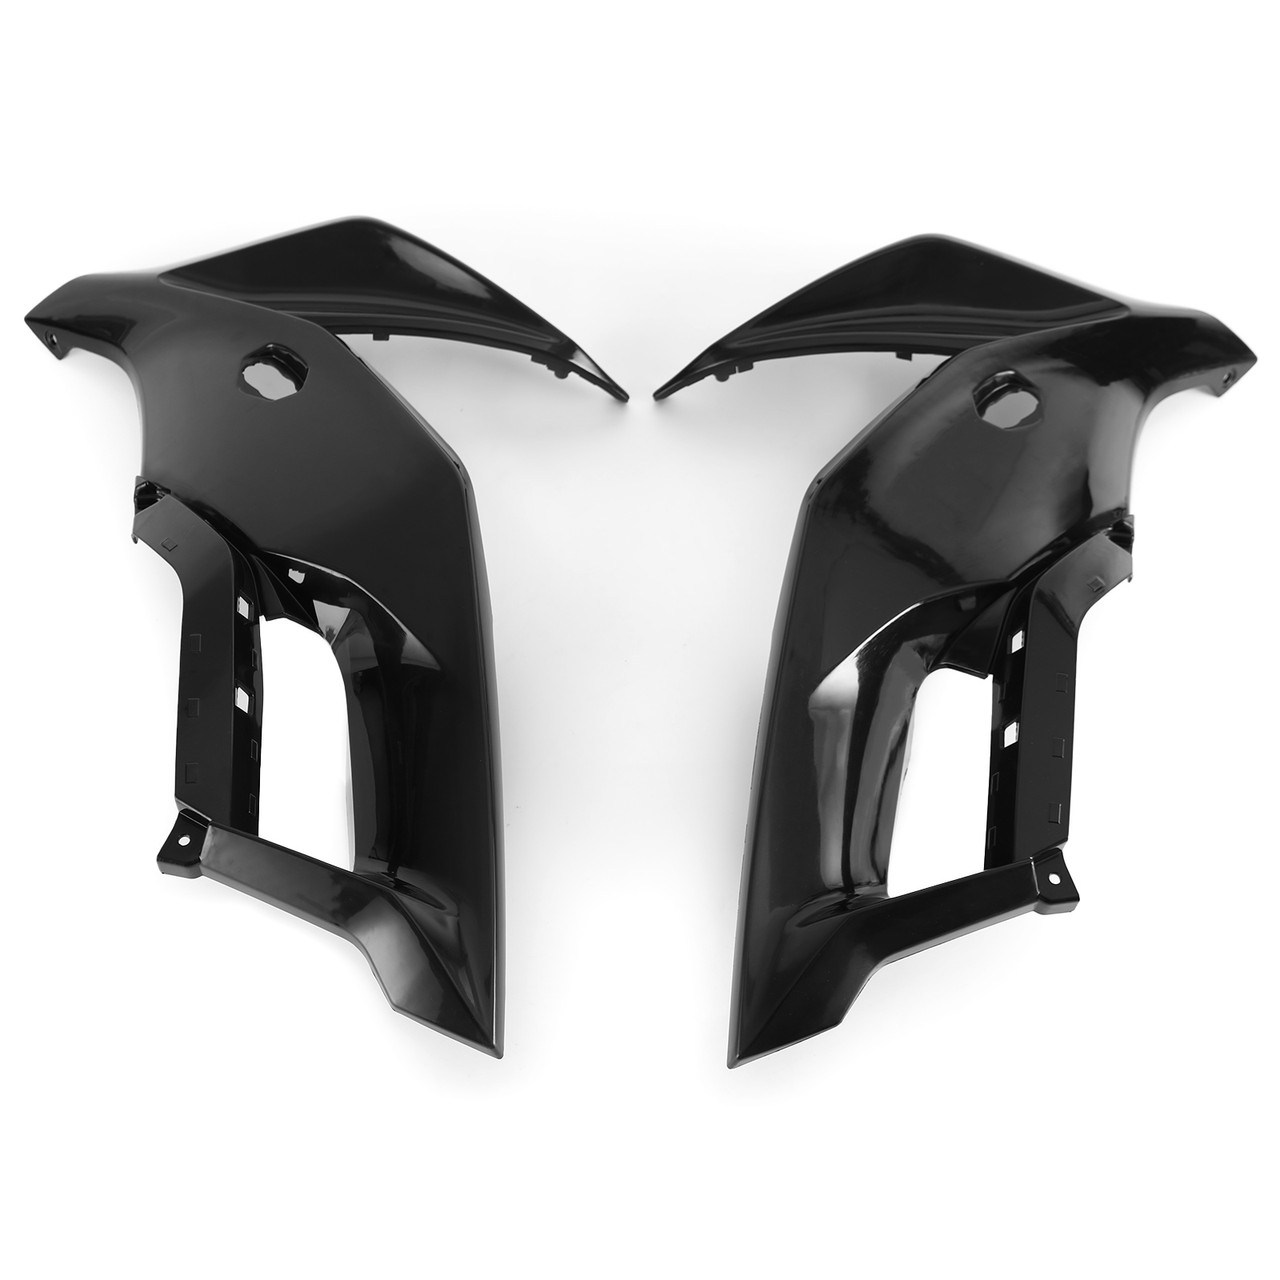 Unpainted ABS Side Upper Panel Fit for Kawasaki Versys650 KLE650 2015-2020 Aftermarket Fairing Part